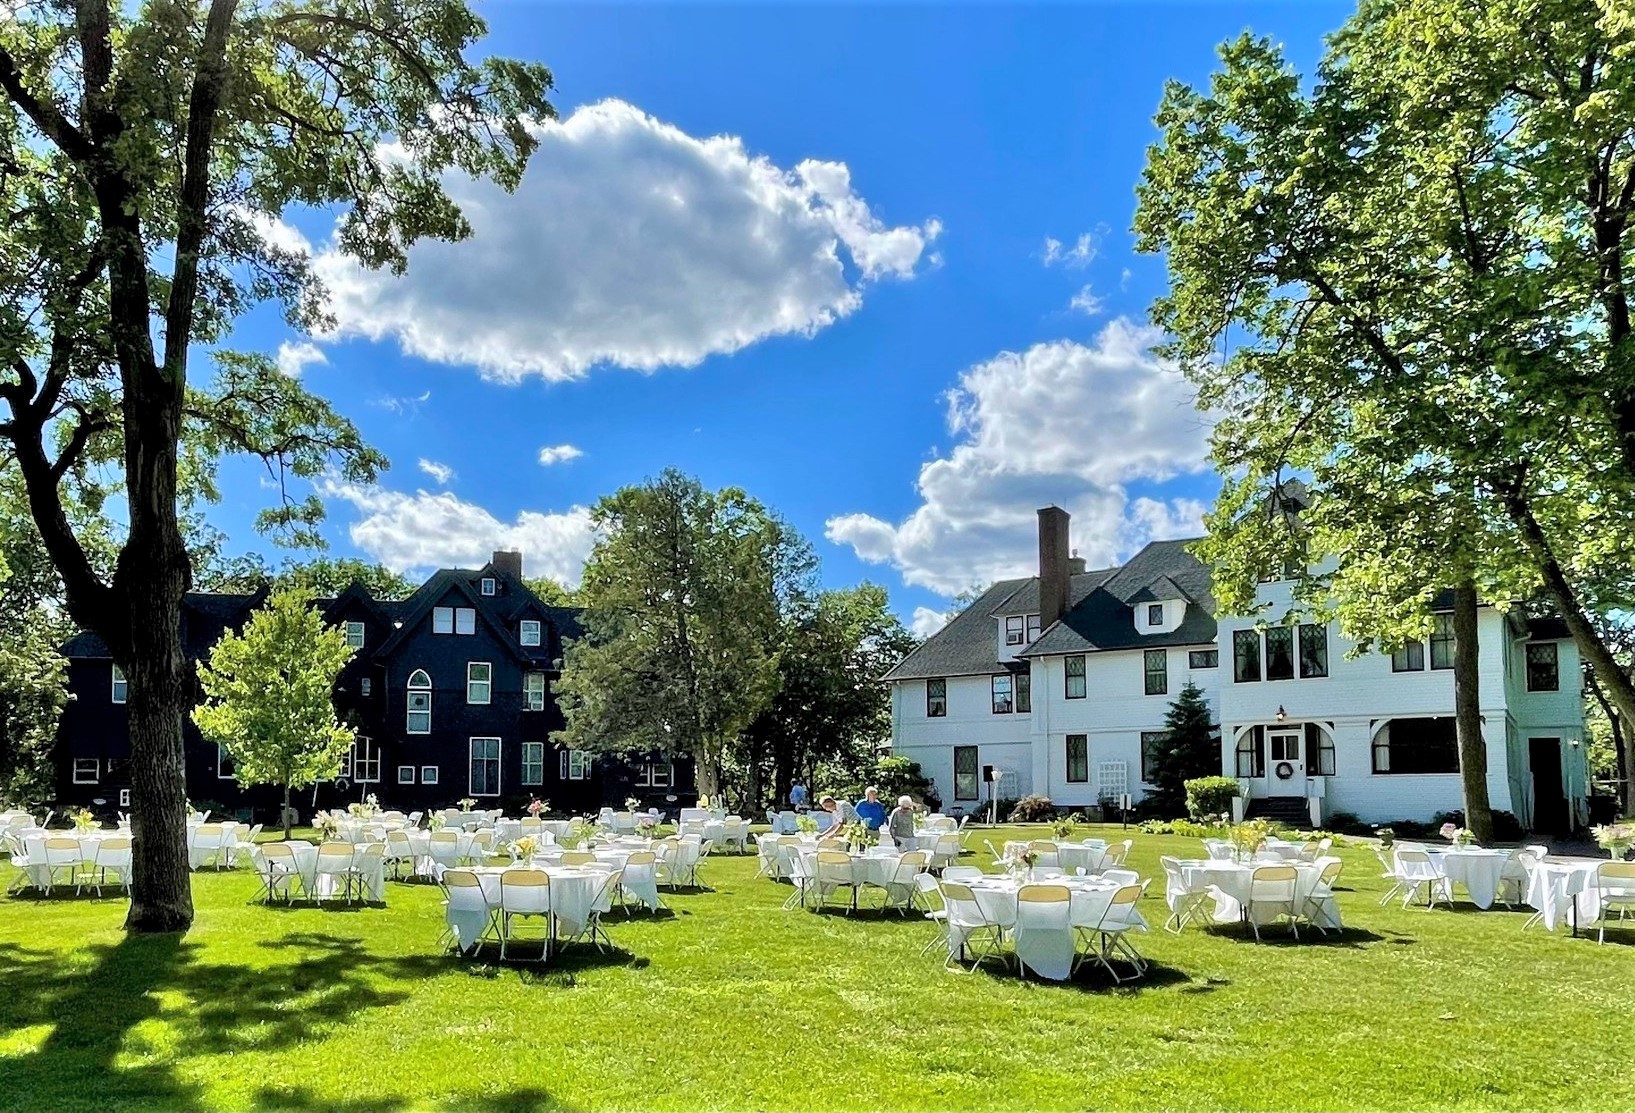 Two mansions of Minnesota lumber barons are popular destination for reunions, weddings Main Photo